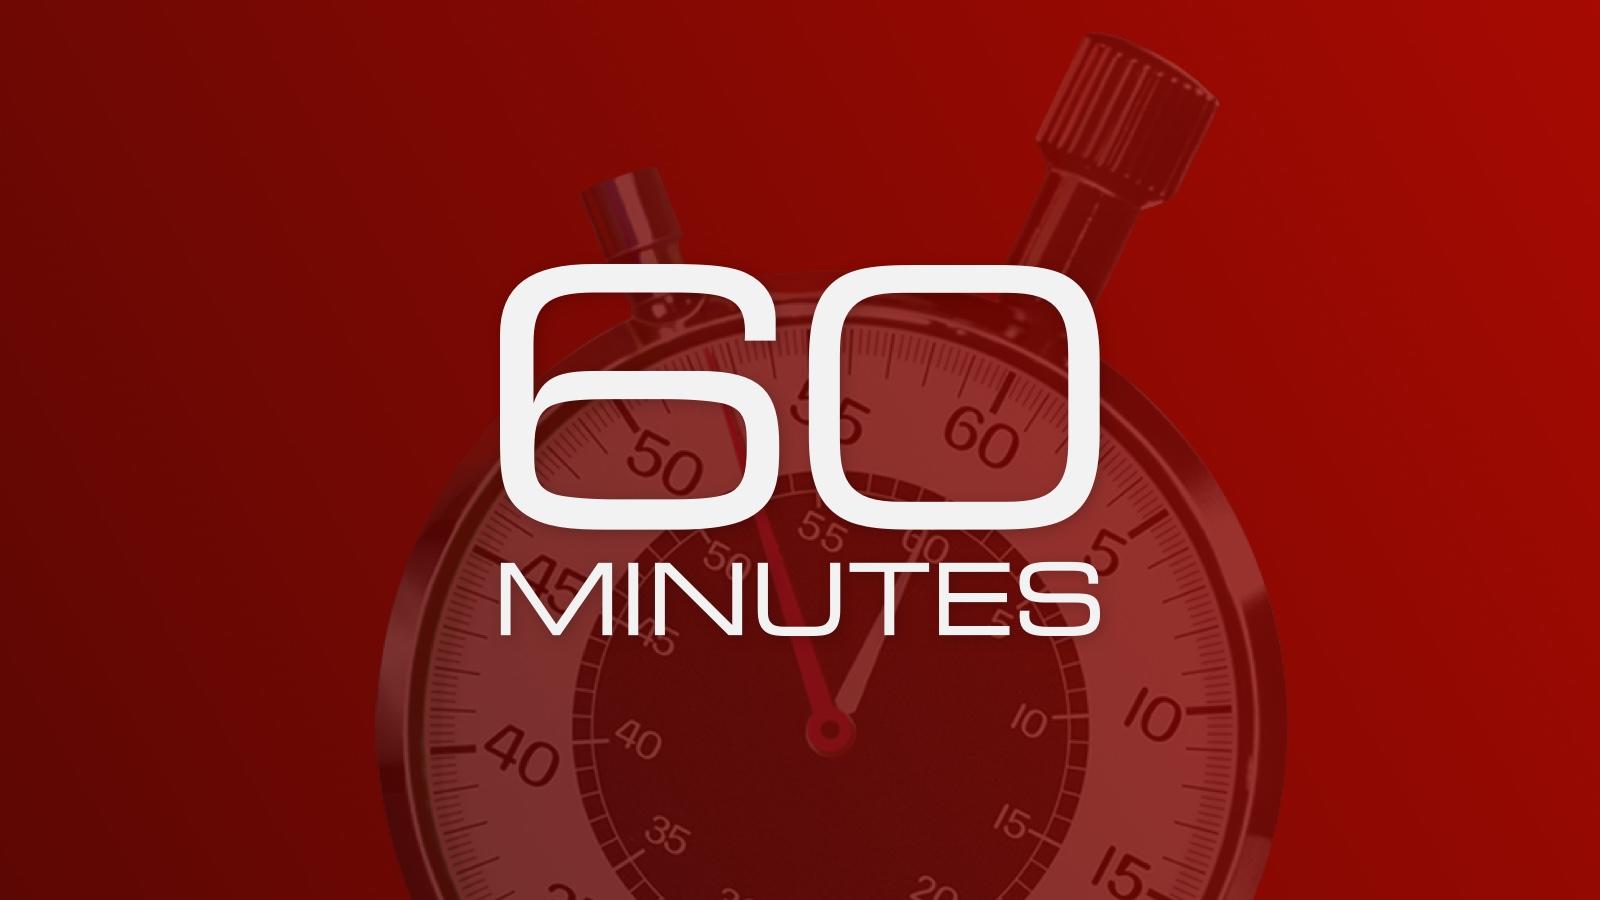 60 Minutes - Episodes, interviews, profiles, reports and 60